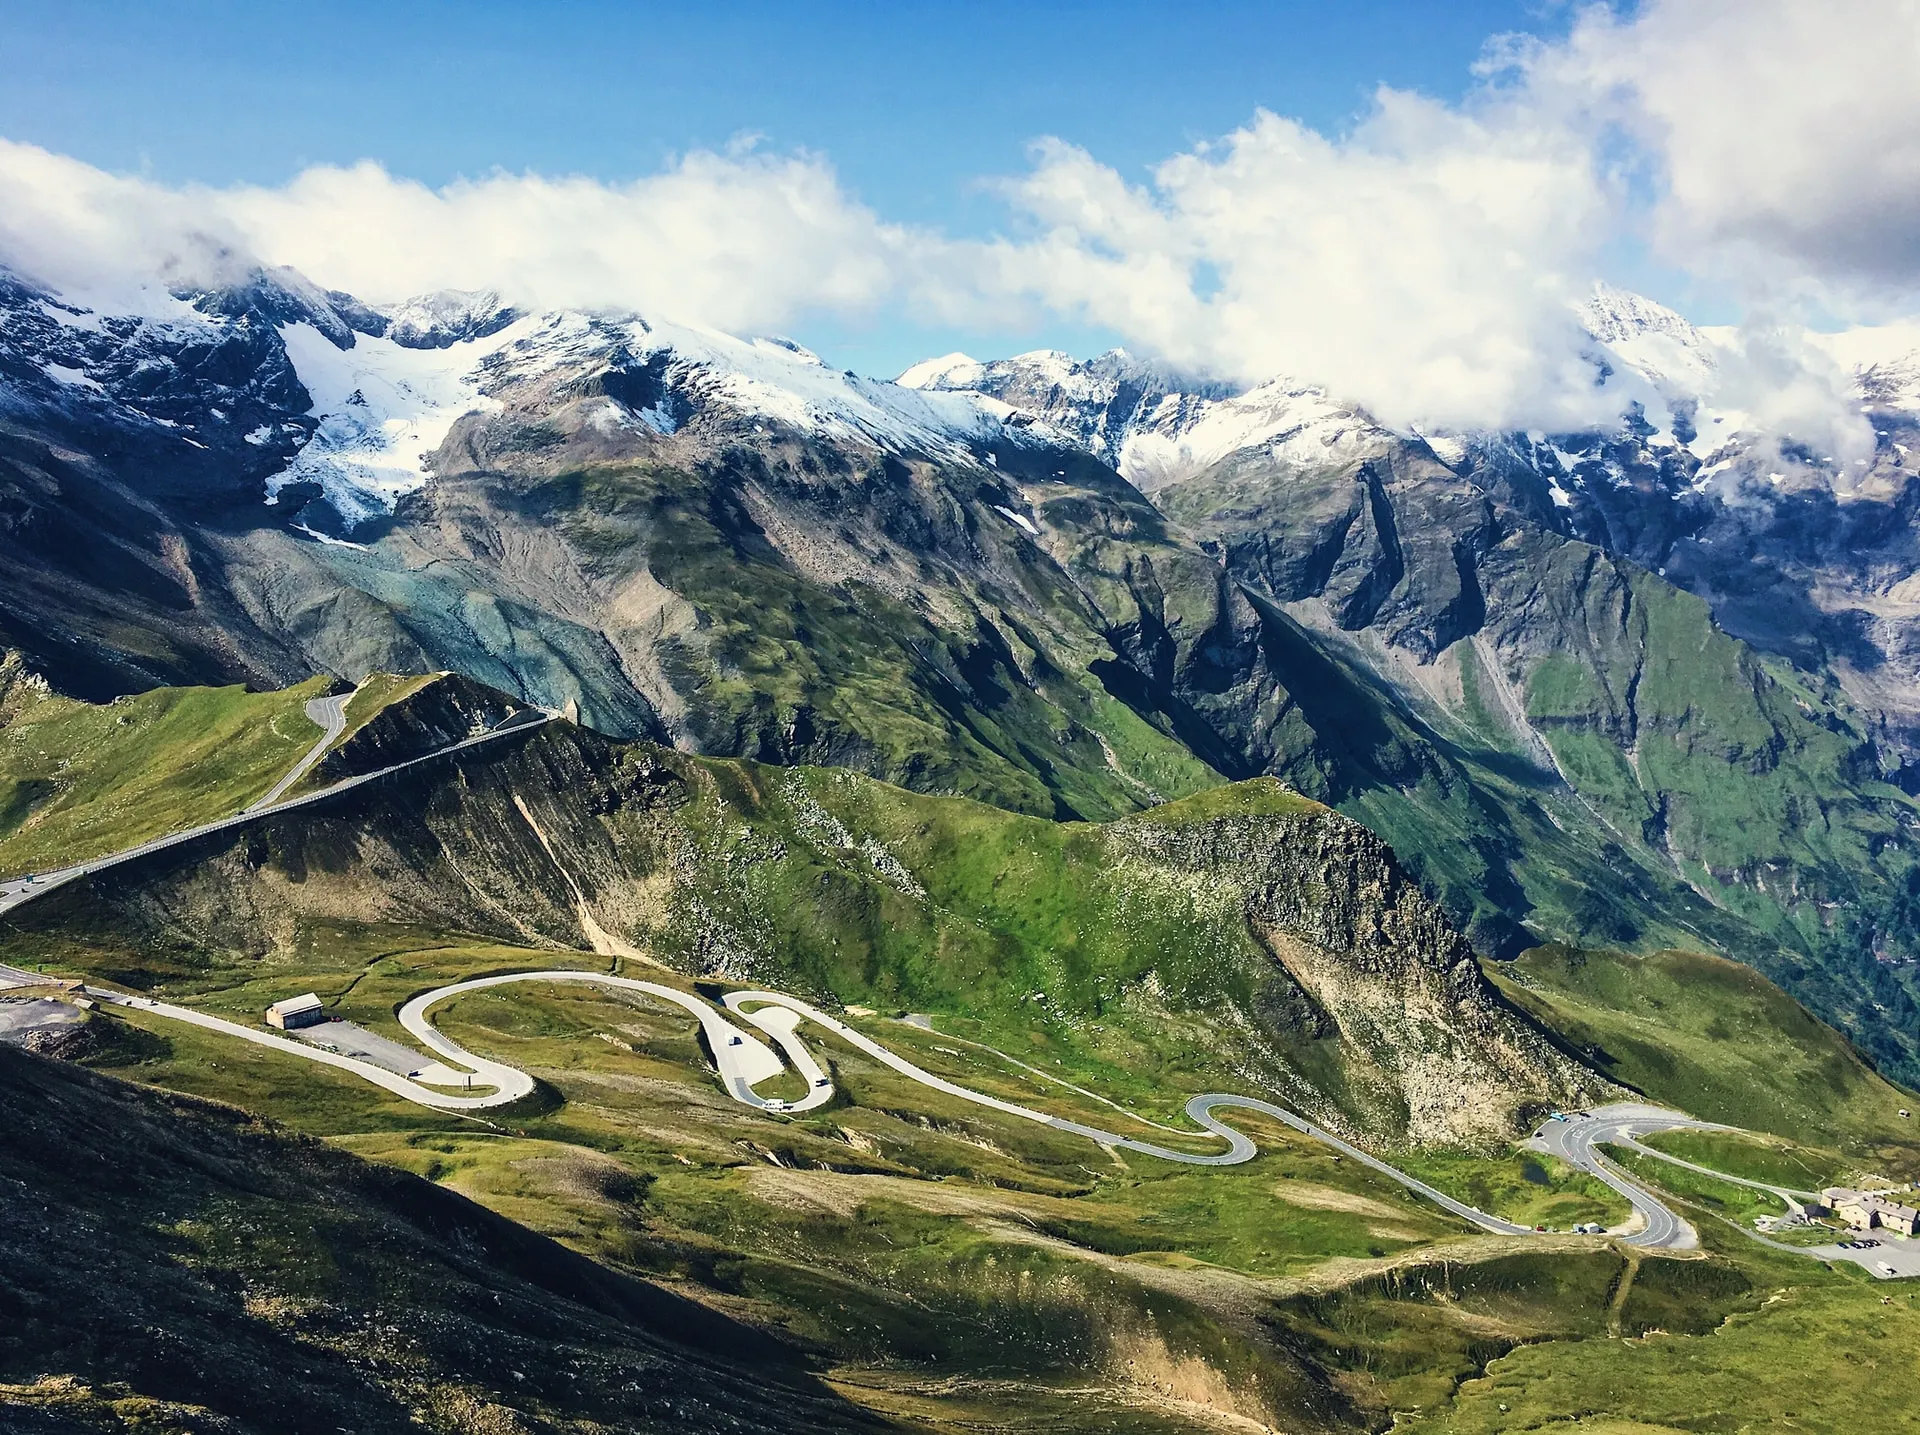 The Grossglockner is, at 3,798 metres above the Adriatic, the highest mountain in Austria and the highest mountain in the Alps east of the Brenner Pass. It is part of the larger Glockner Group of the Hohe Tauern range, situated along the main ridge of the Central Eastern Alps and the Alpine divide.